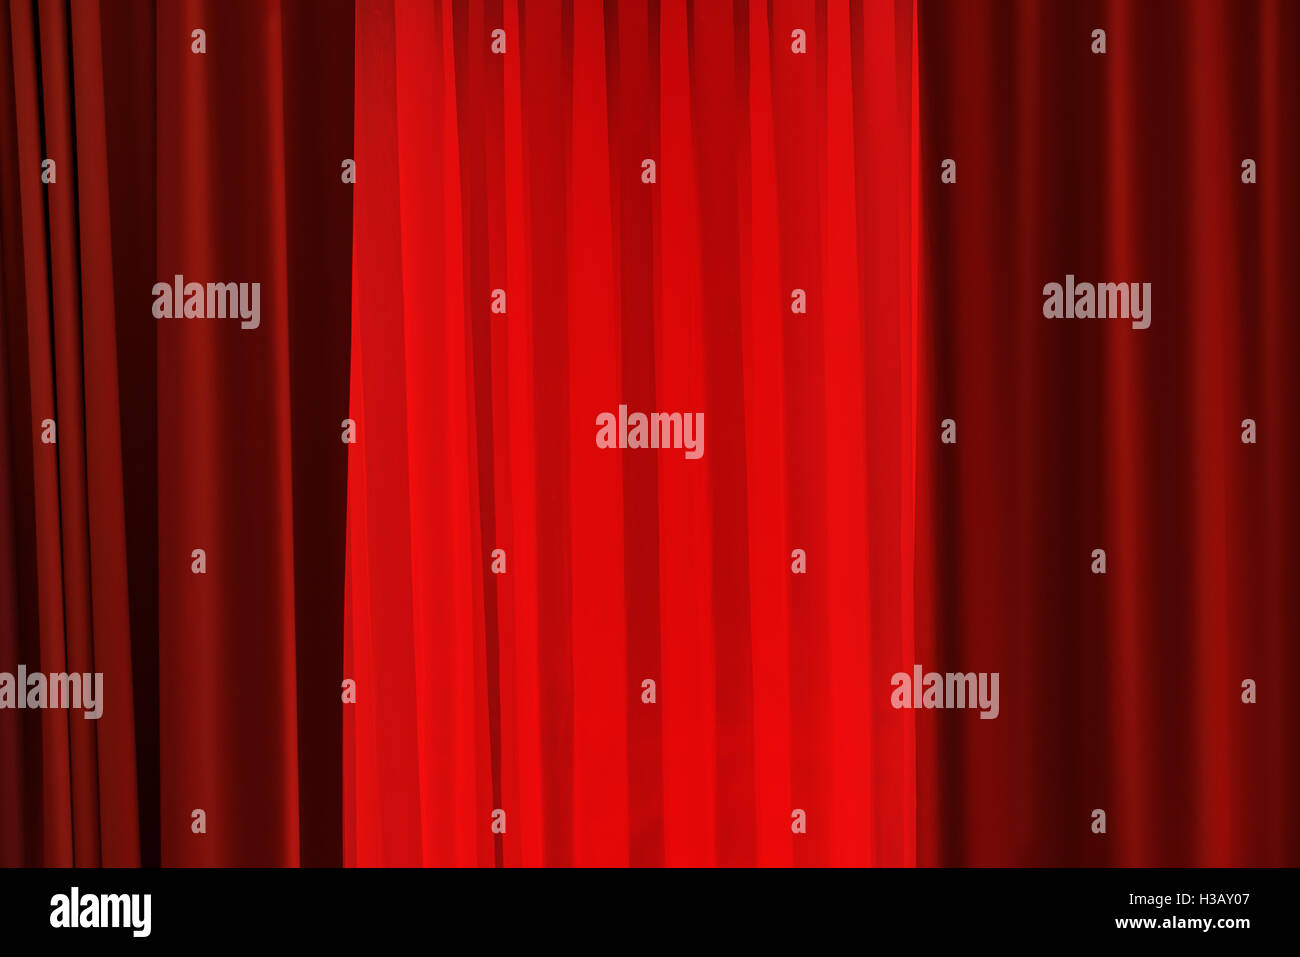 Theater red curtain as abstract entertainment background Stock Photo